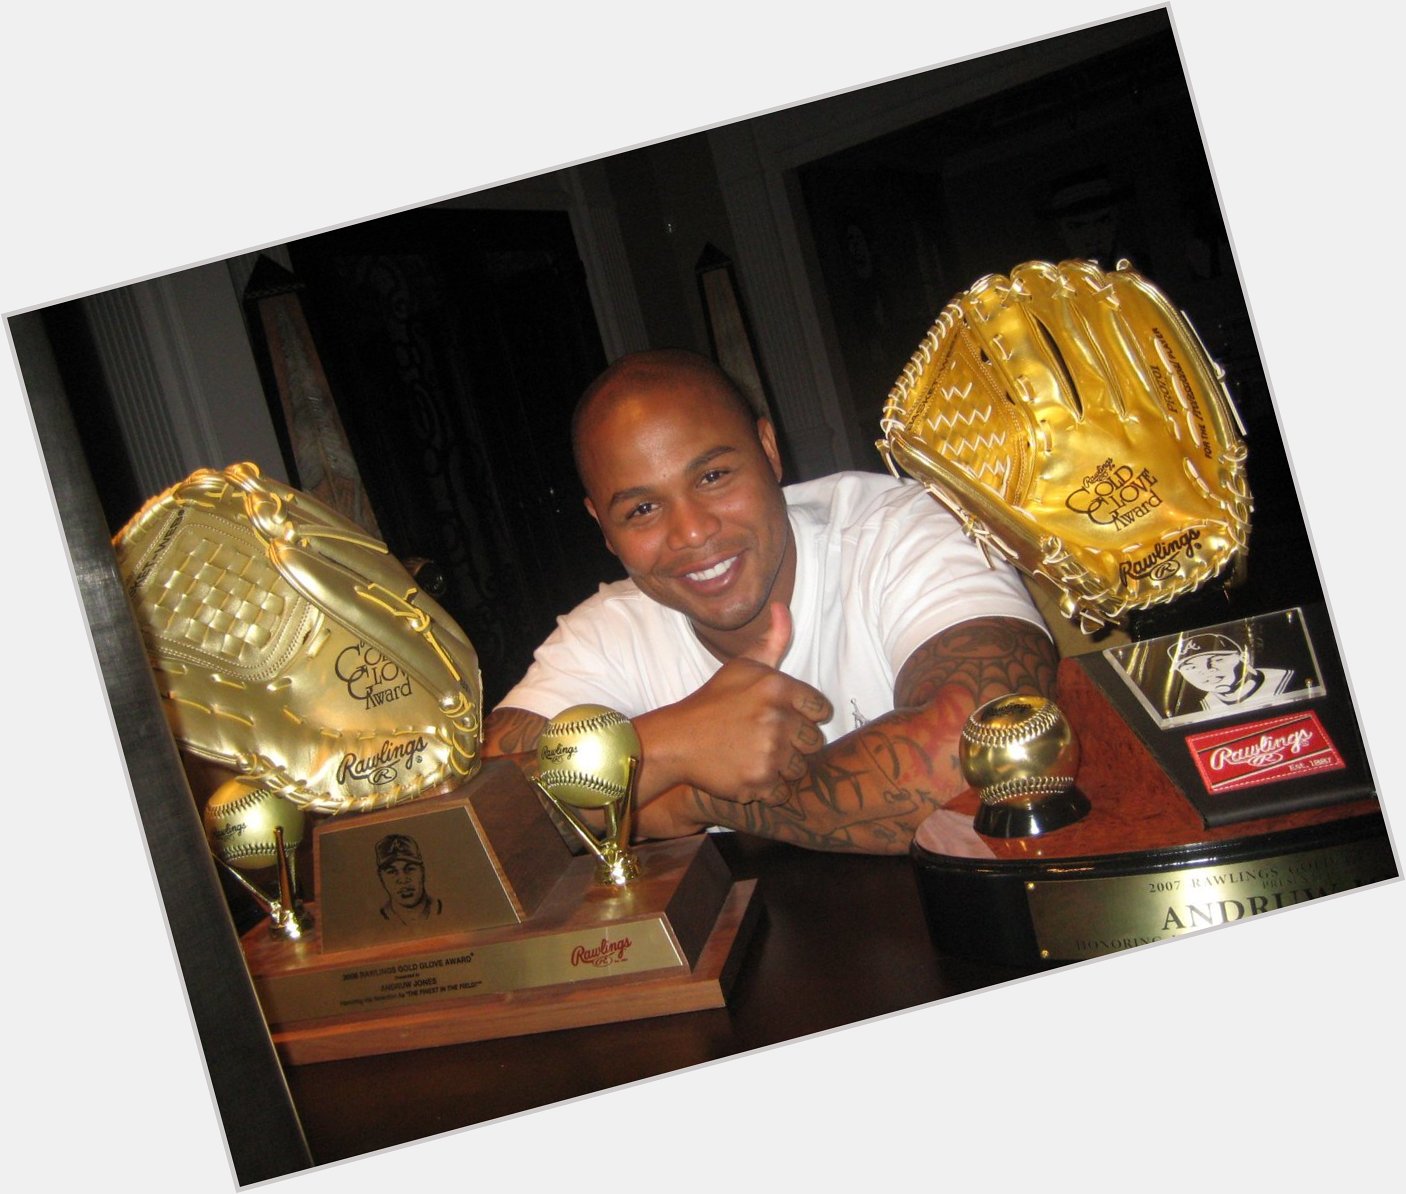 Happy Birthday to client and friend, Andruw Jones! 